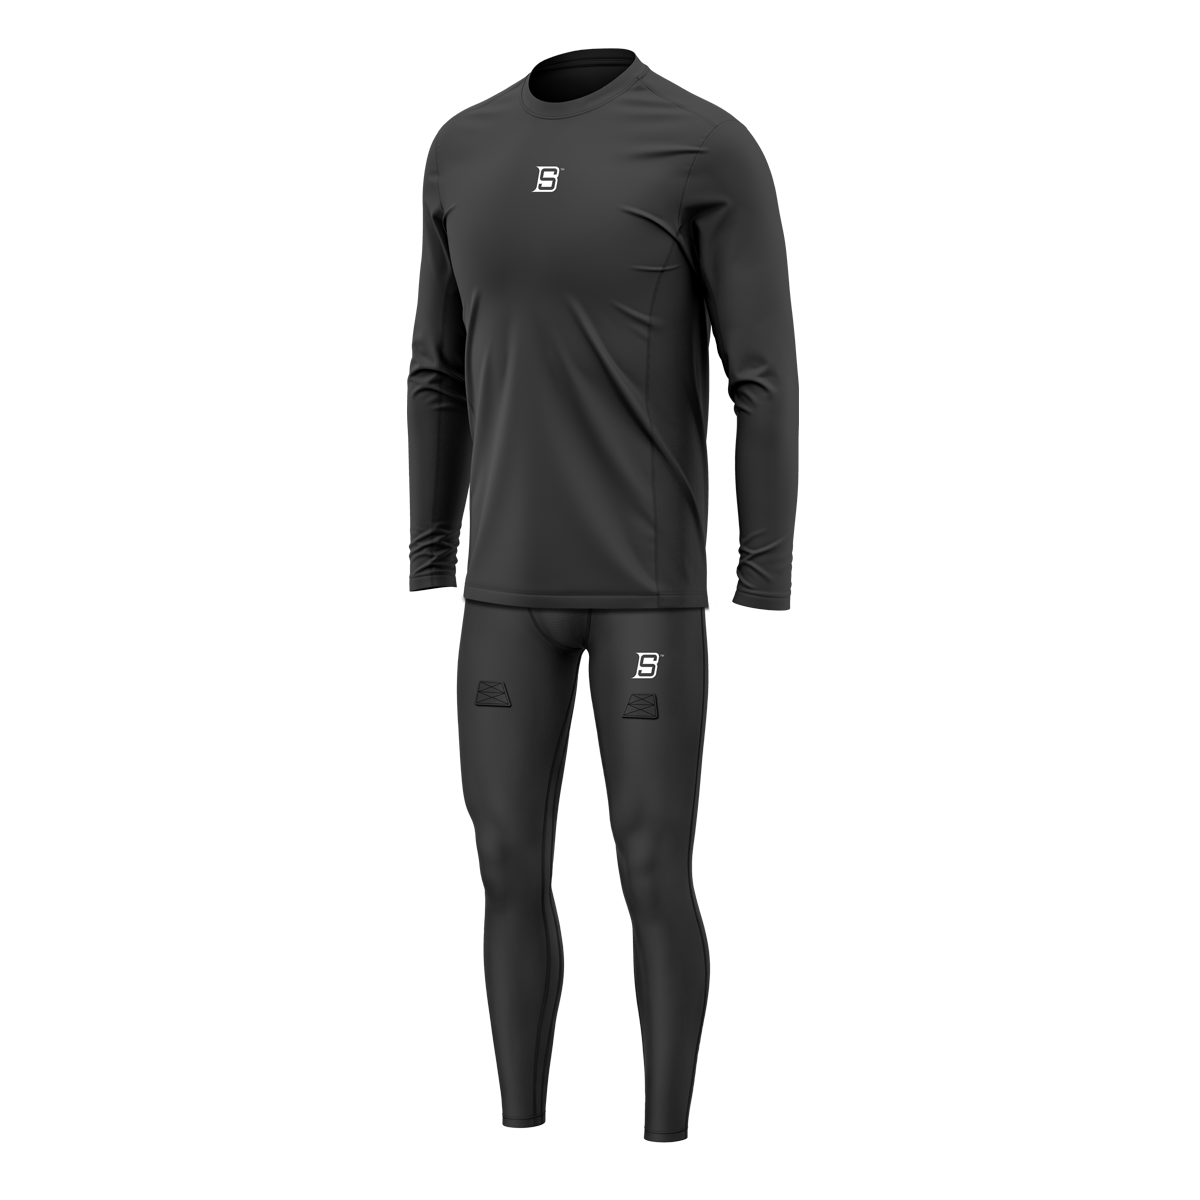 BAUER PERFORMANCE BASELAYER PANT YOUTH